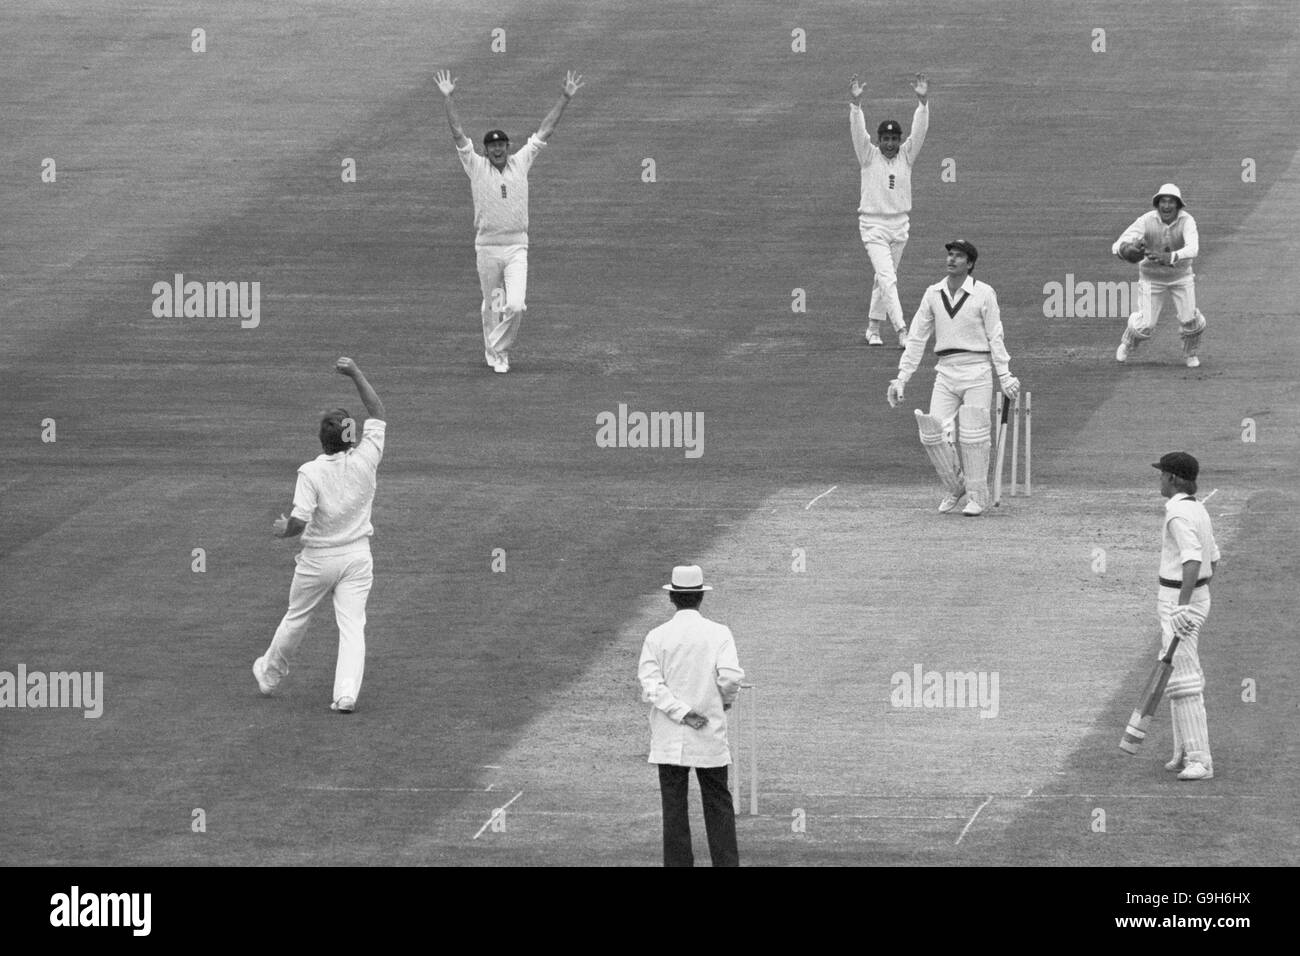 England's Ian Botham (l) celebrates taking his first test wicket with the dismissal of Australia's Greg Chappell (third r) for 19, to the delight of teammates Tony Greig (second l), Mike Brearley (fourth r) and Alan Knott (top r) Stock Photo